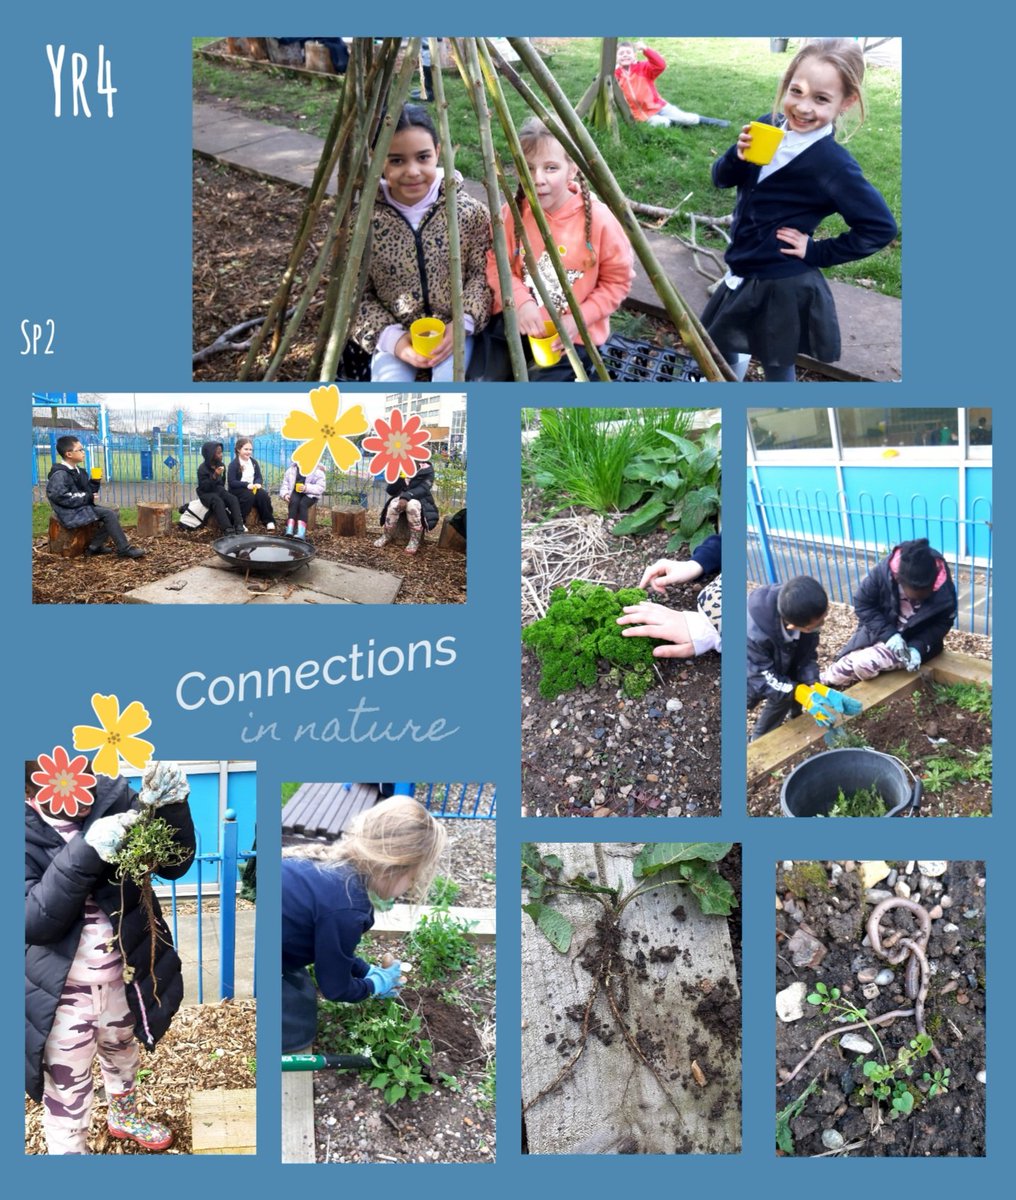 🌳Such a busy week for Forest School @ChivenorP Raised beds cleared✅ plants & insects identified ✅worms compared & counted✅hot chocolate & relaxing with friends ✅sense of achievement gained ✅memories made✅ Thanks for a great term Yr3&4, you've been amazing 🤩